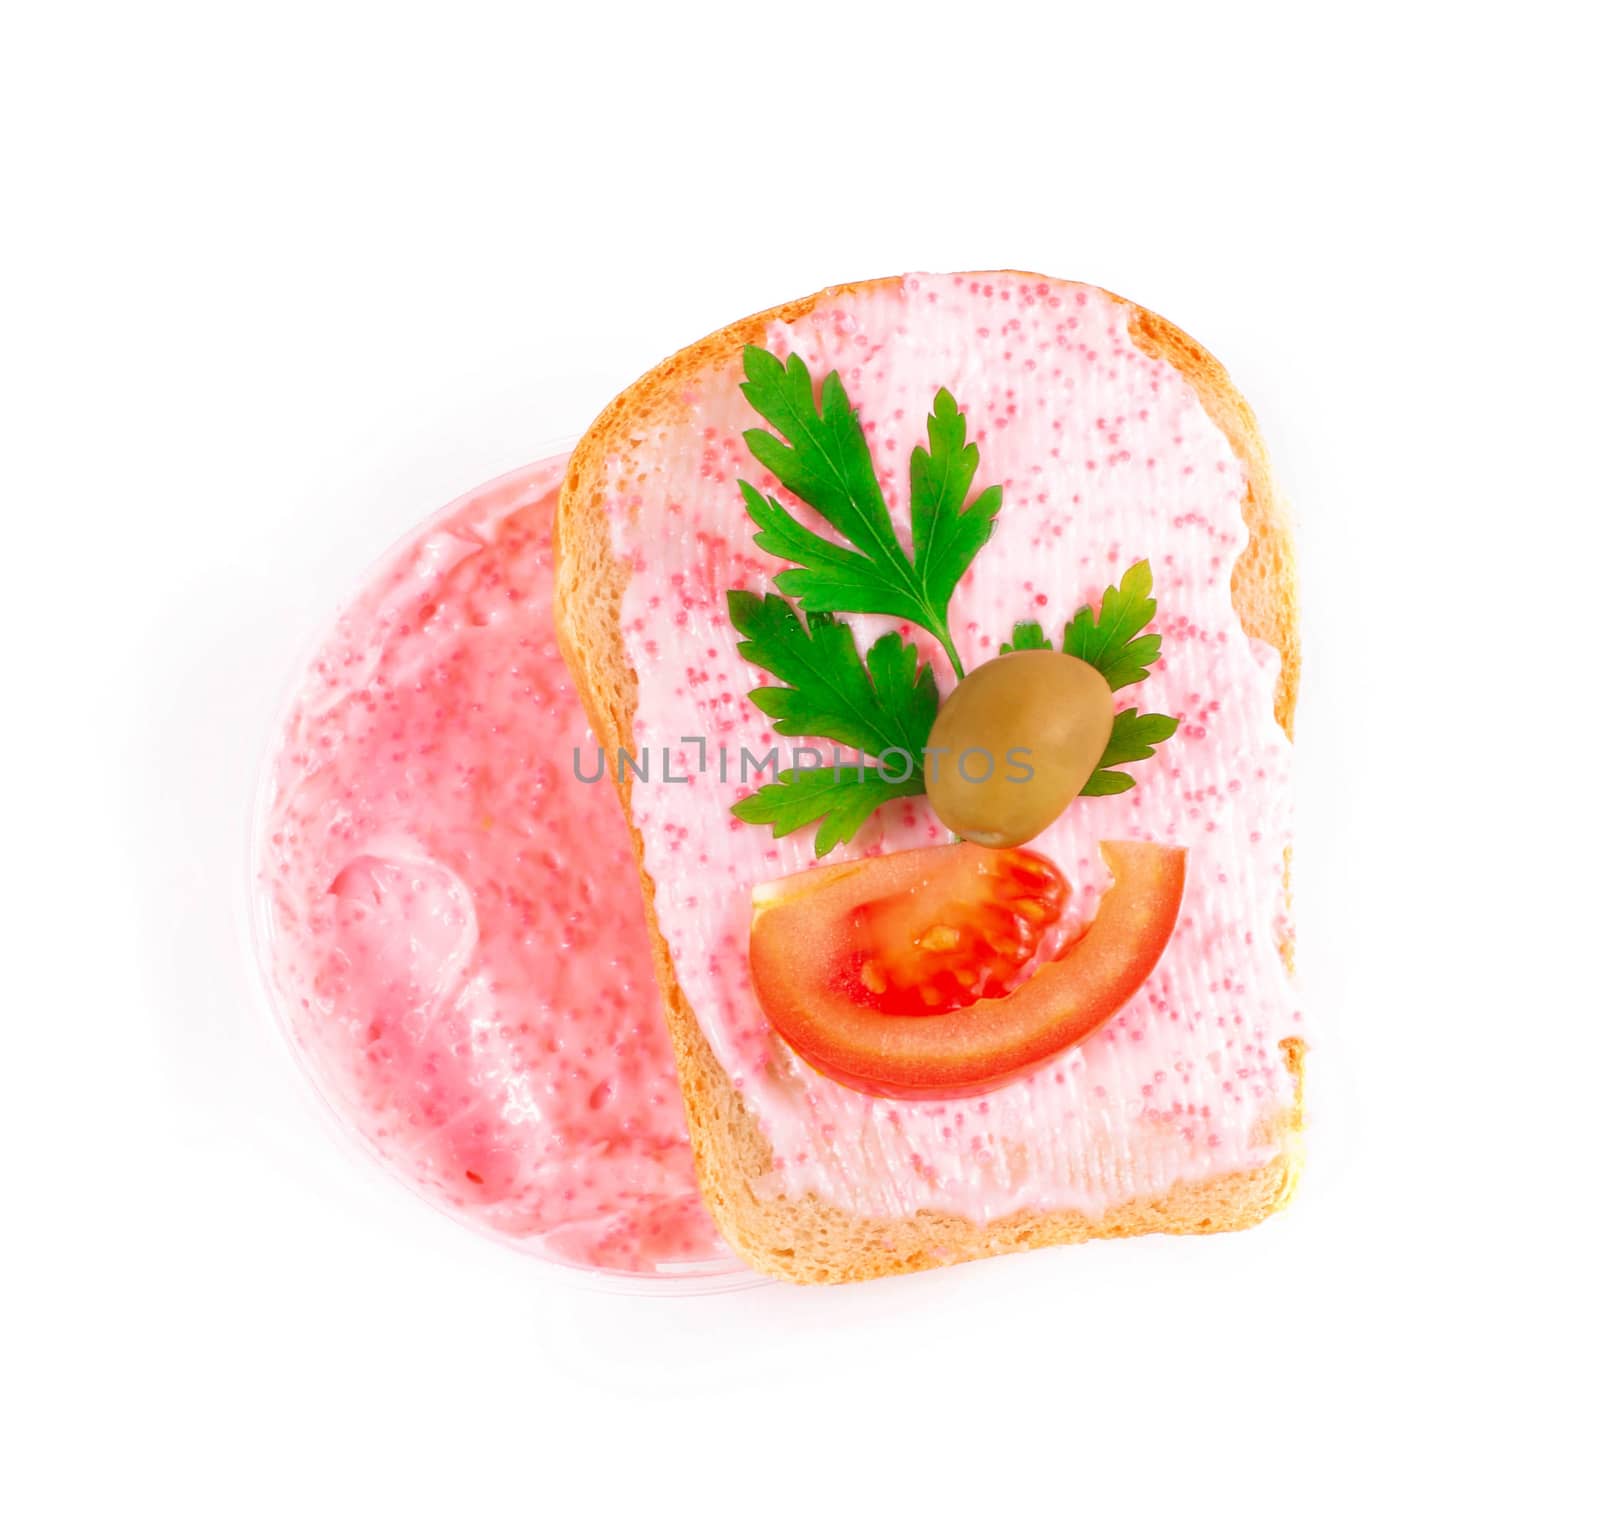 toast with tomato and fish caviar cream by shutswis